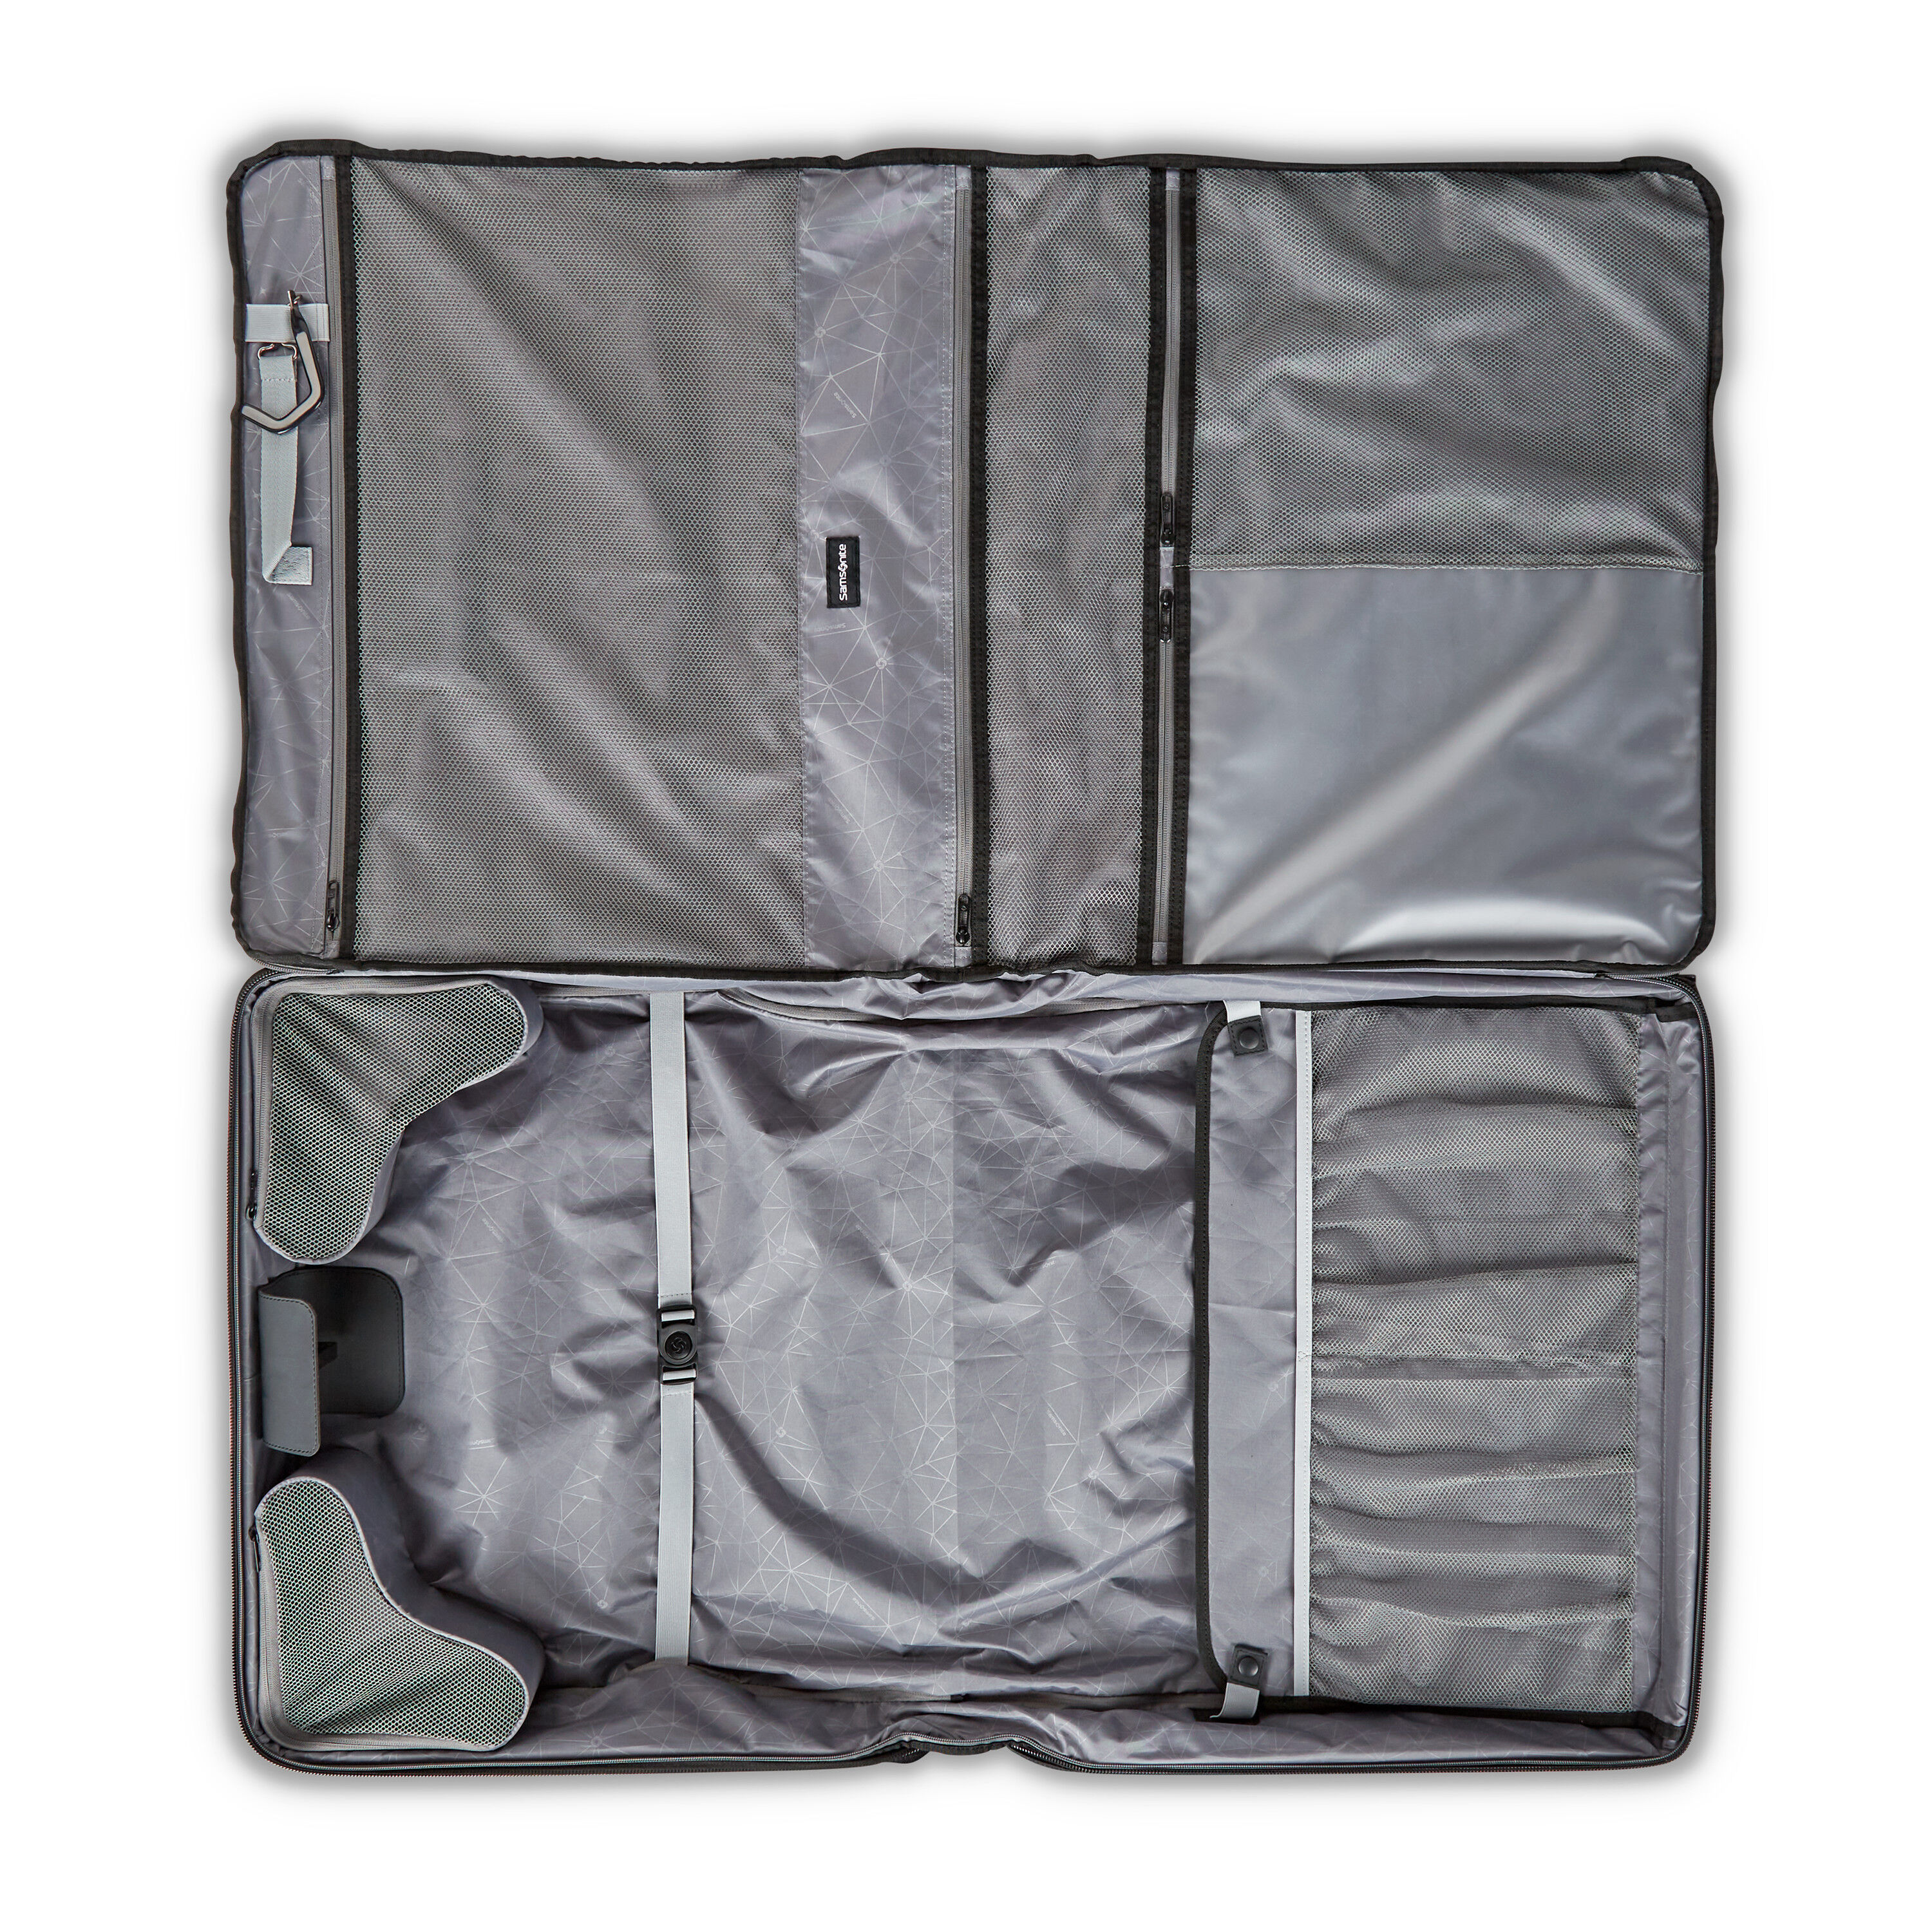 COSTUME BAG - DANCE Garment & Storage - TWO PACK - Black/Clear with Pockets  | eBay